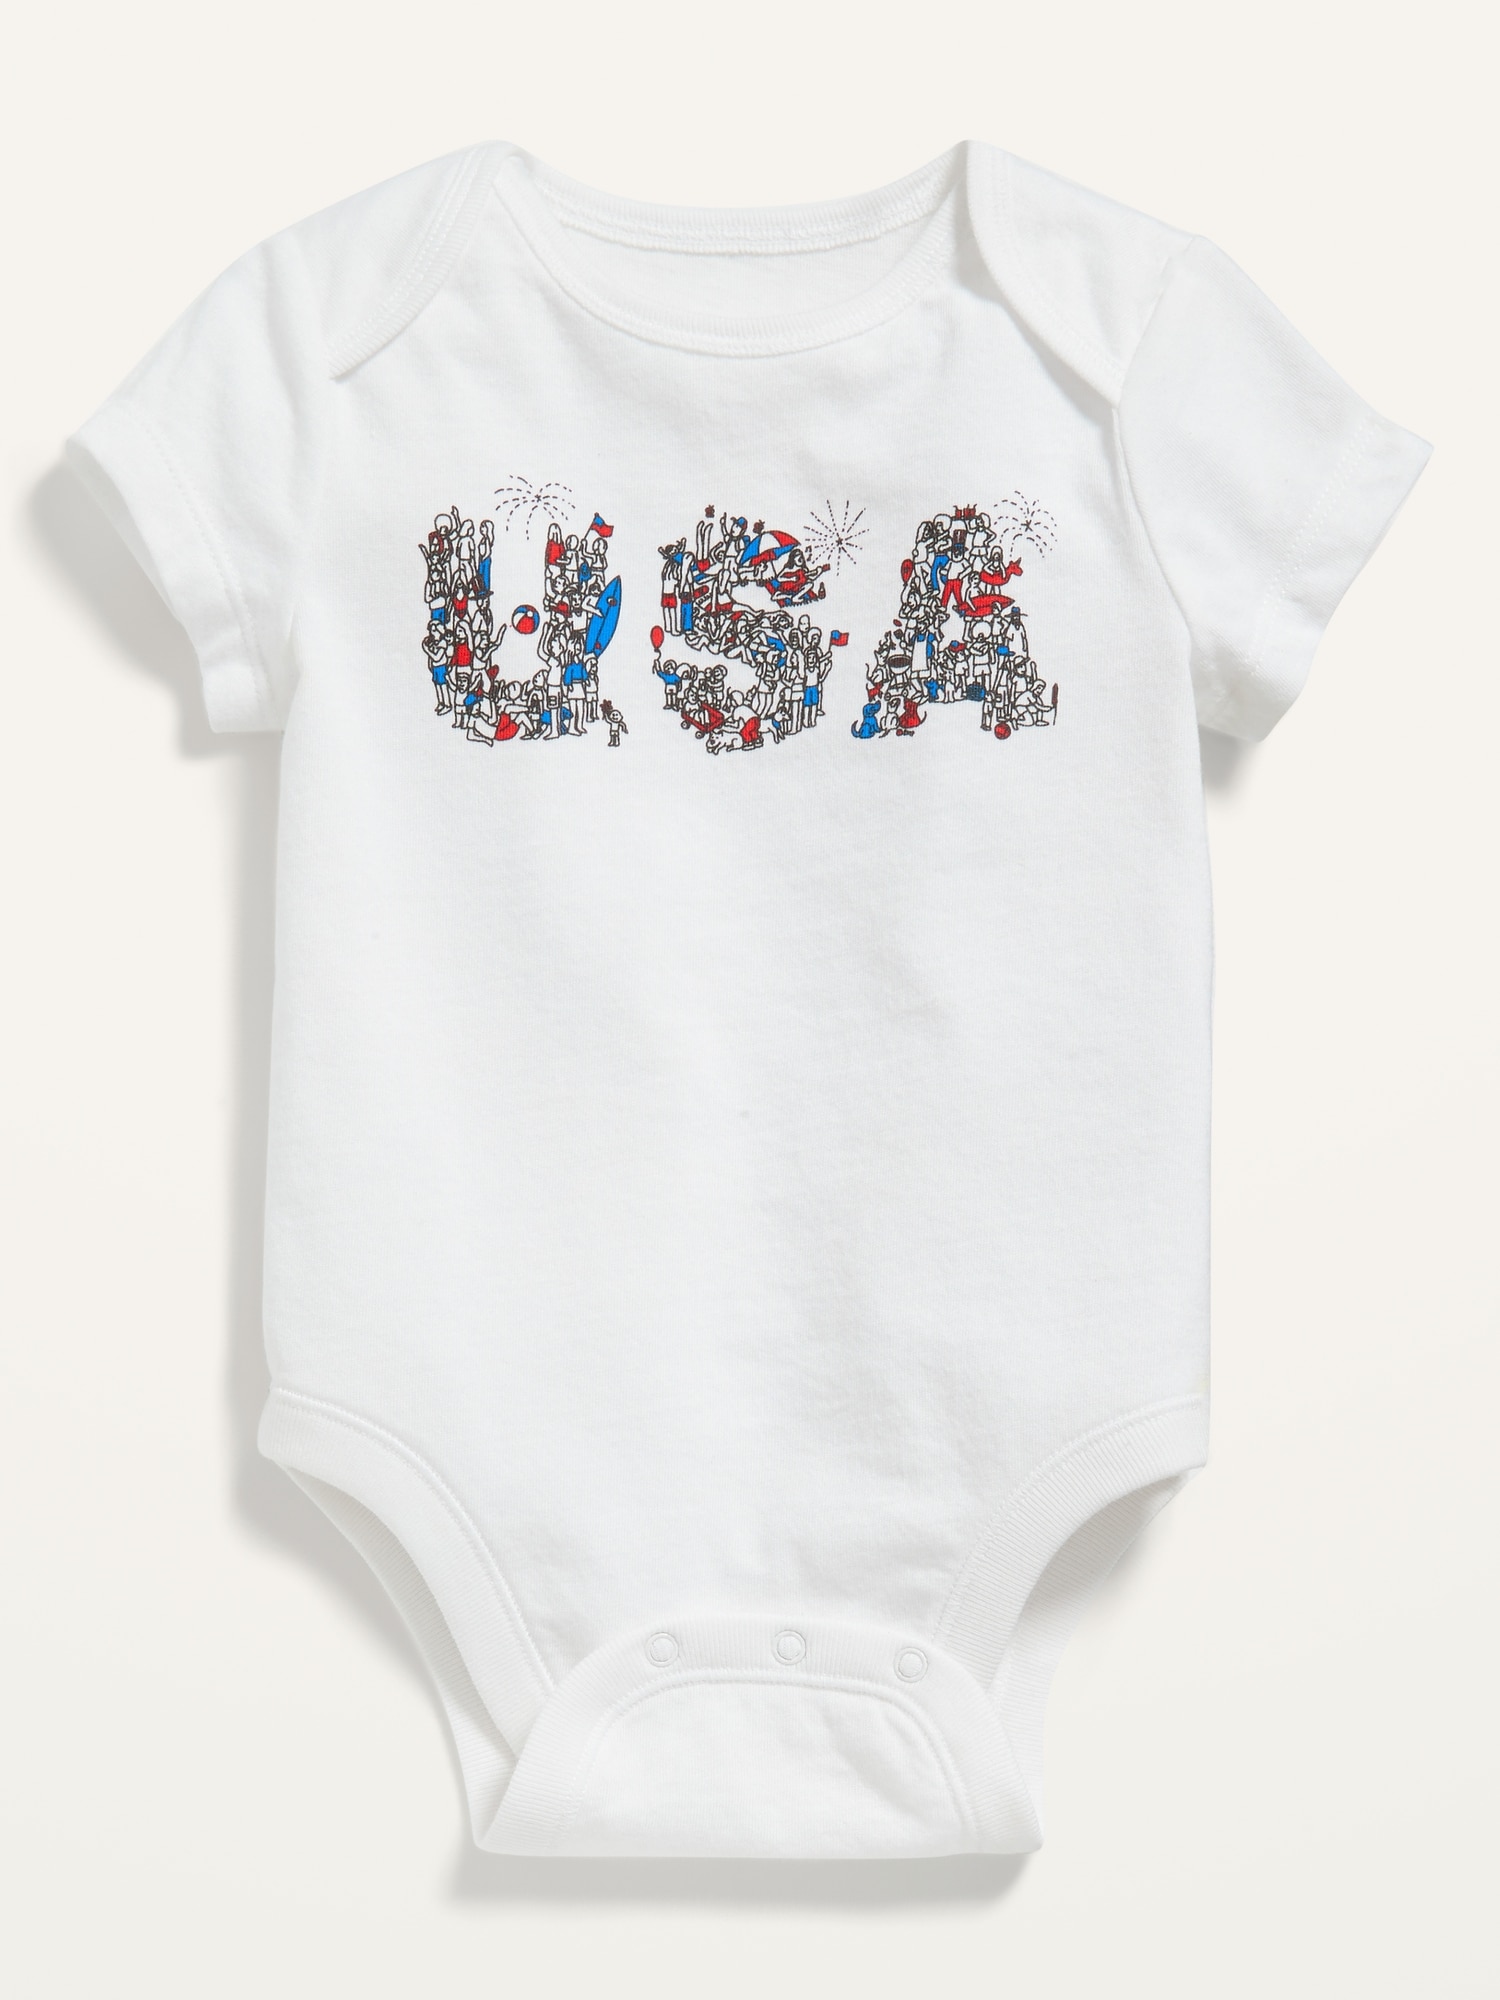 Matching Graphic Bodysuit for Baby